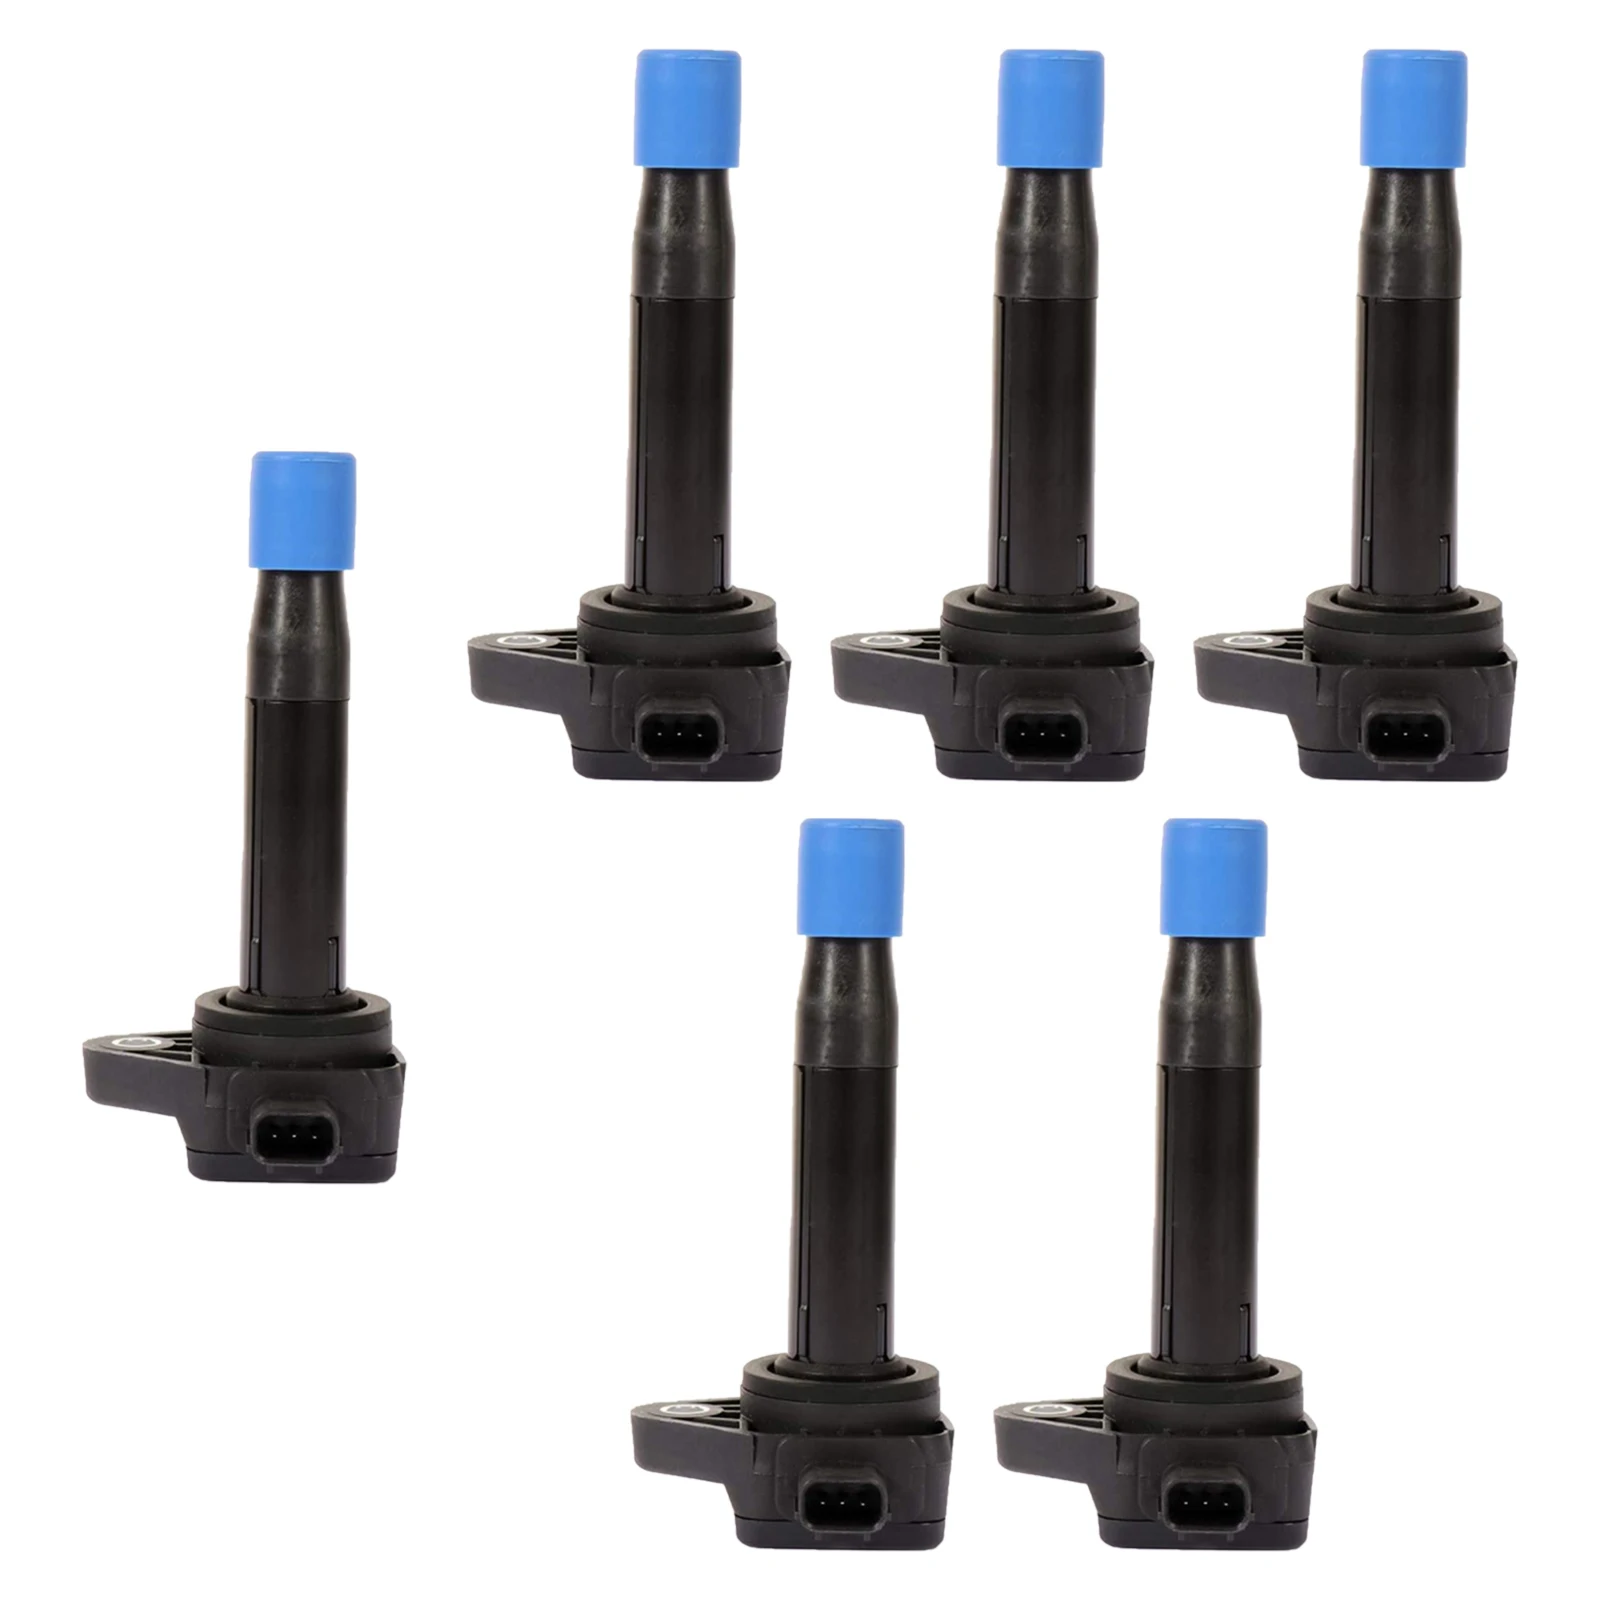 6Pcs Ignition Coil Packs, Ignition Coils Replacement for Honda Accord 08-12 1788379 Direct Replacement